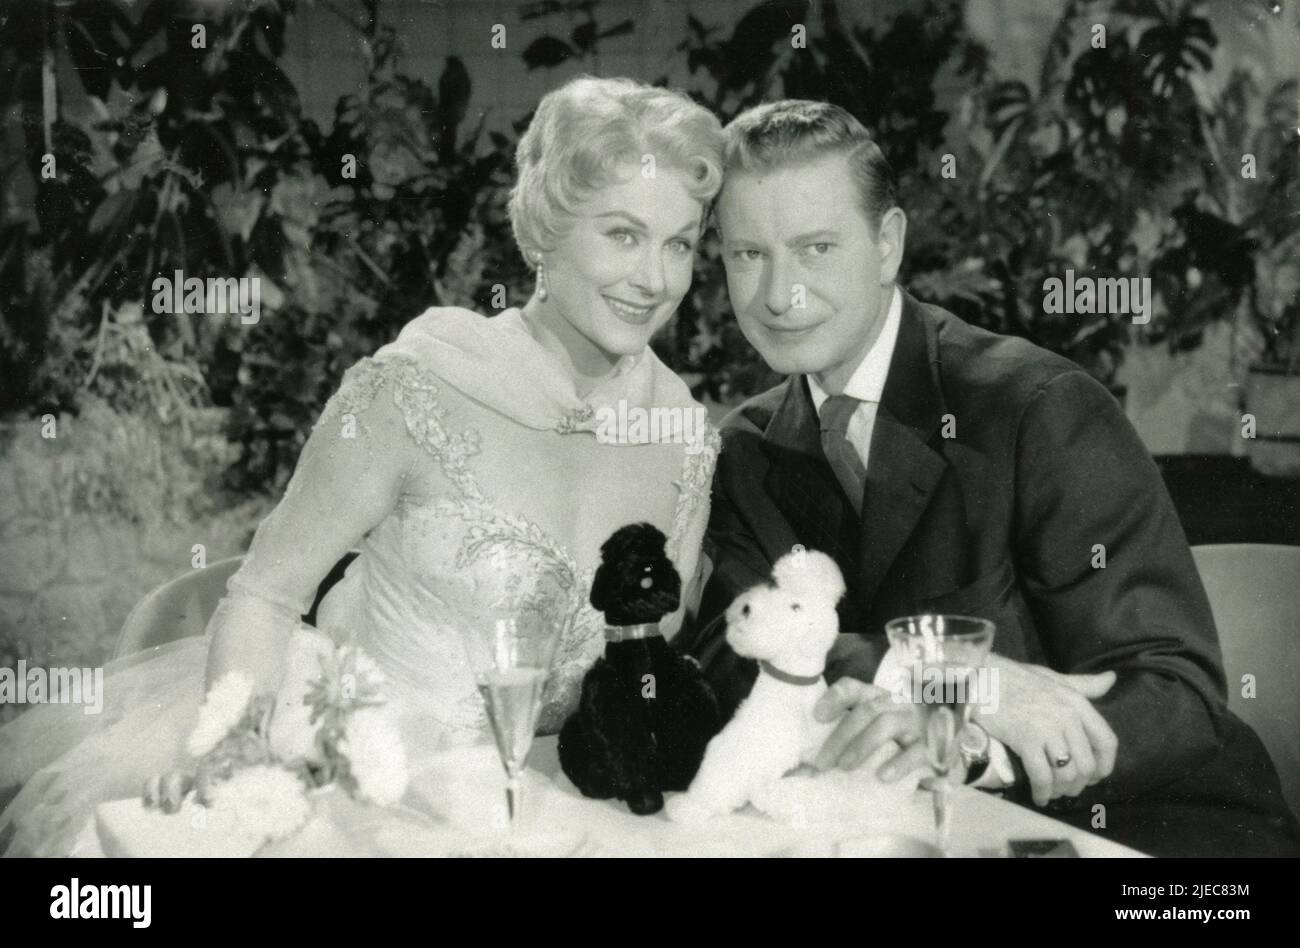 German actor Dieter Borsche and Hungarian actress Marika Rokk in the movie At the Green Cockatoo by Night, Germany 1957 Stock Photo